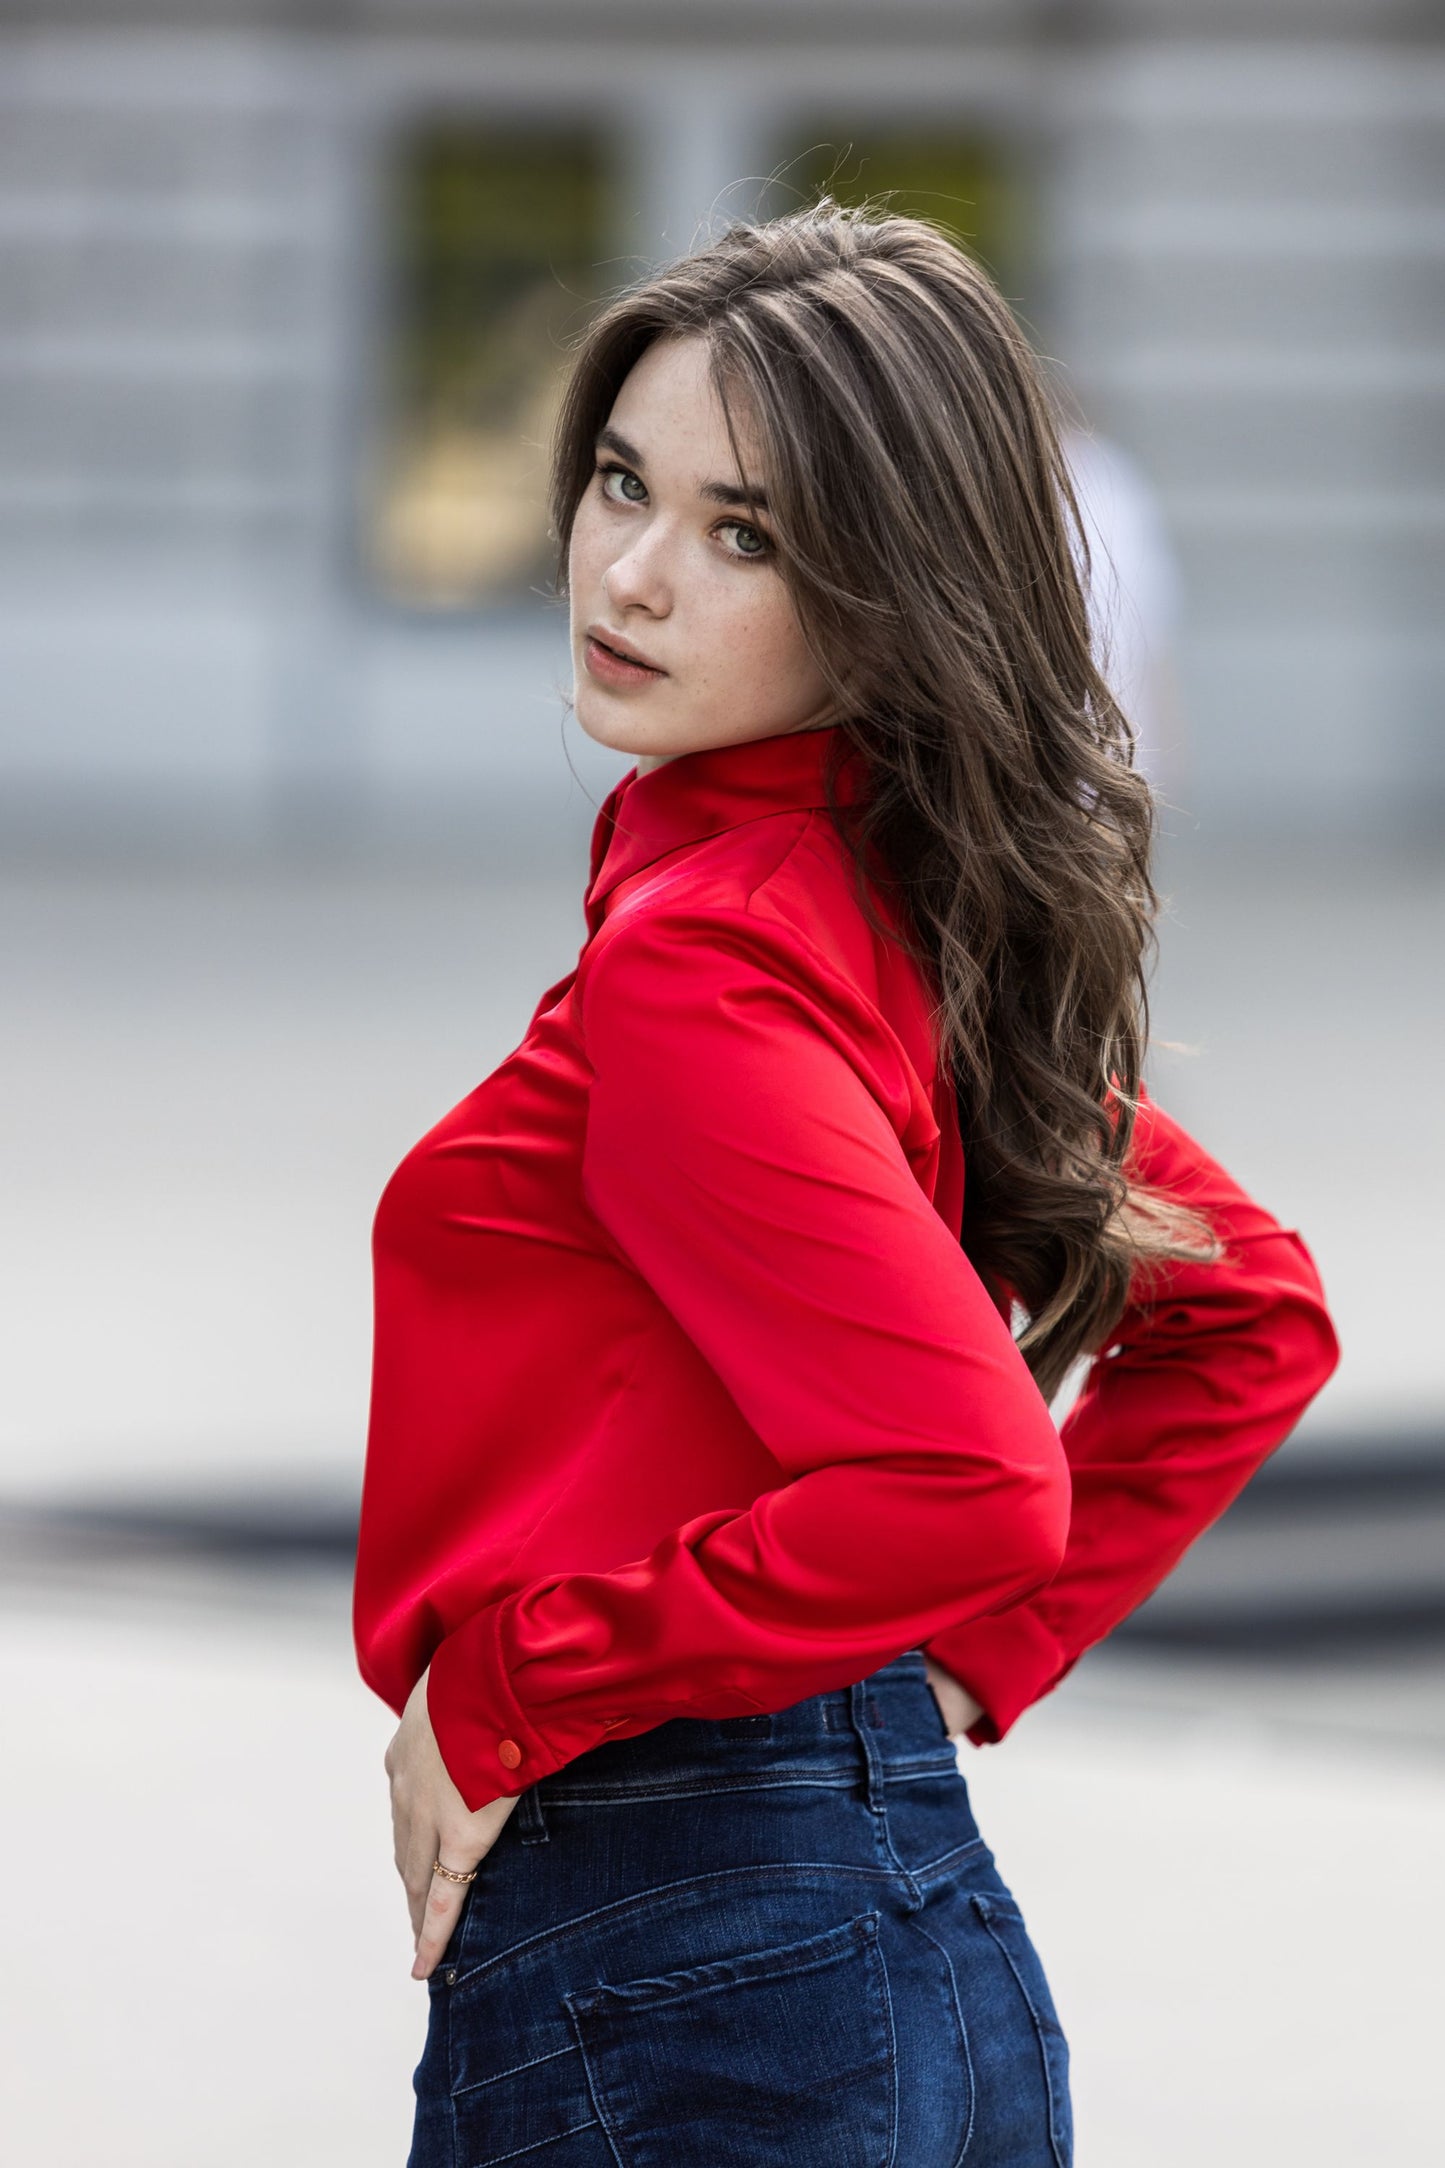 Classic red satin blouse with buttons and collar